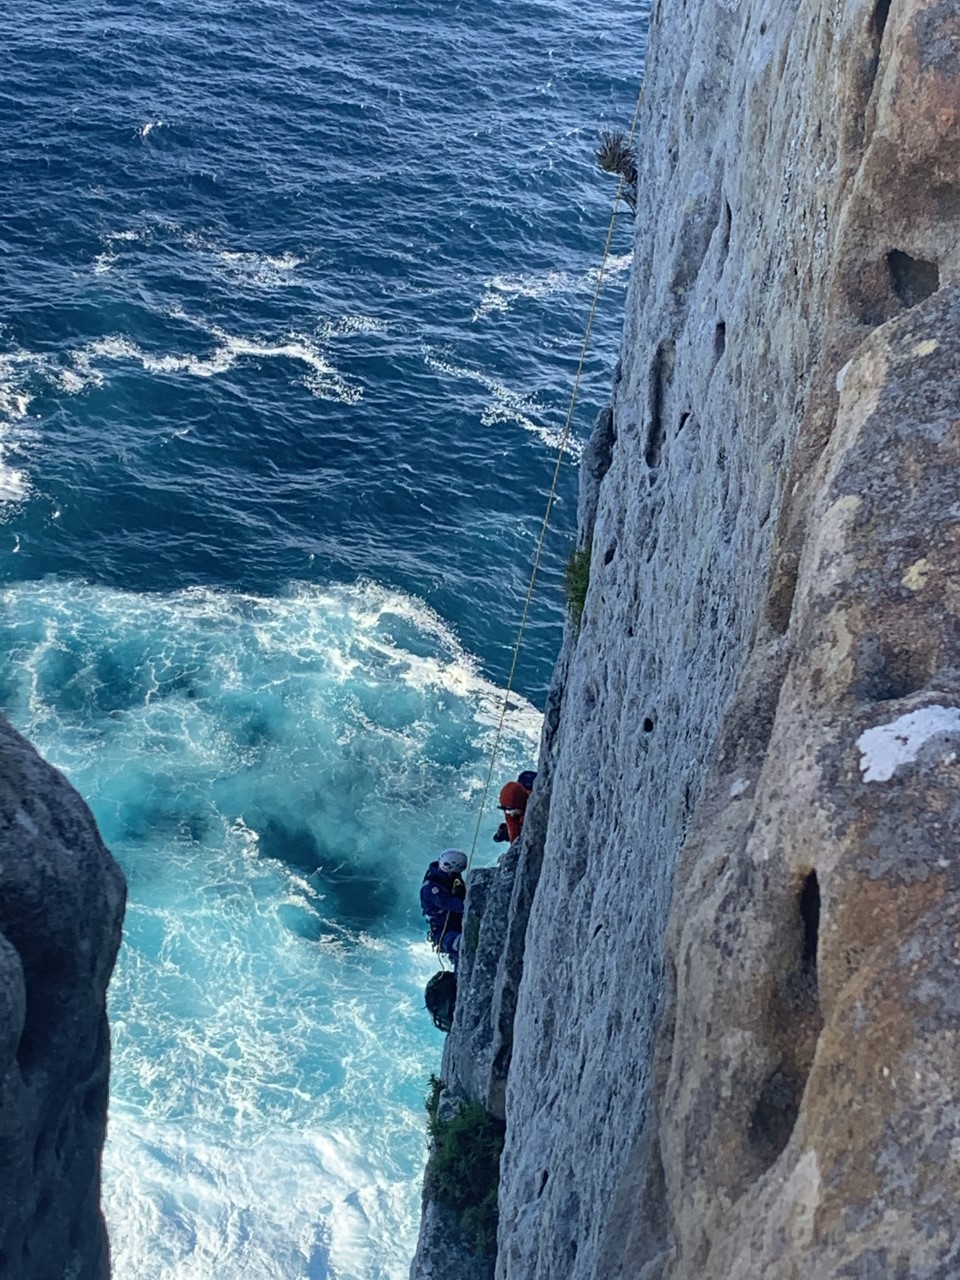 The man, 25, ended up landing on a ledge on the cliff face following the fall at Beecroft Peninsula NSW